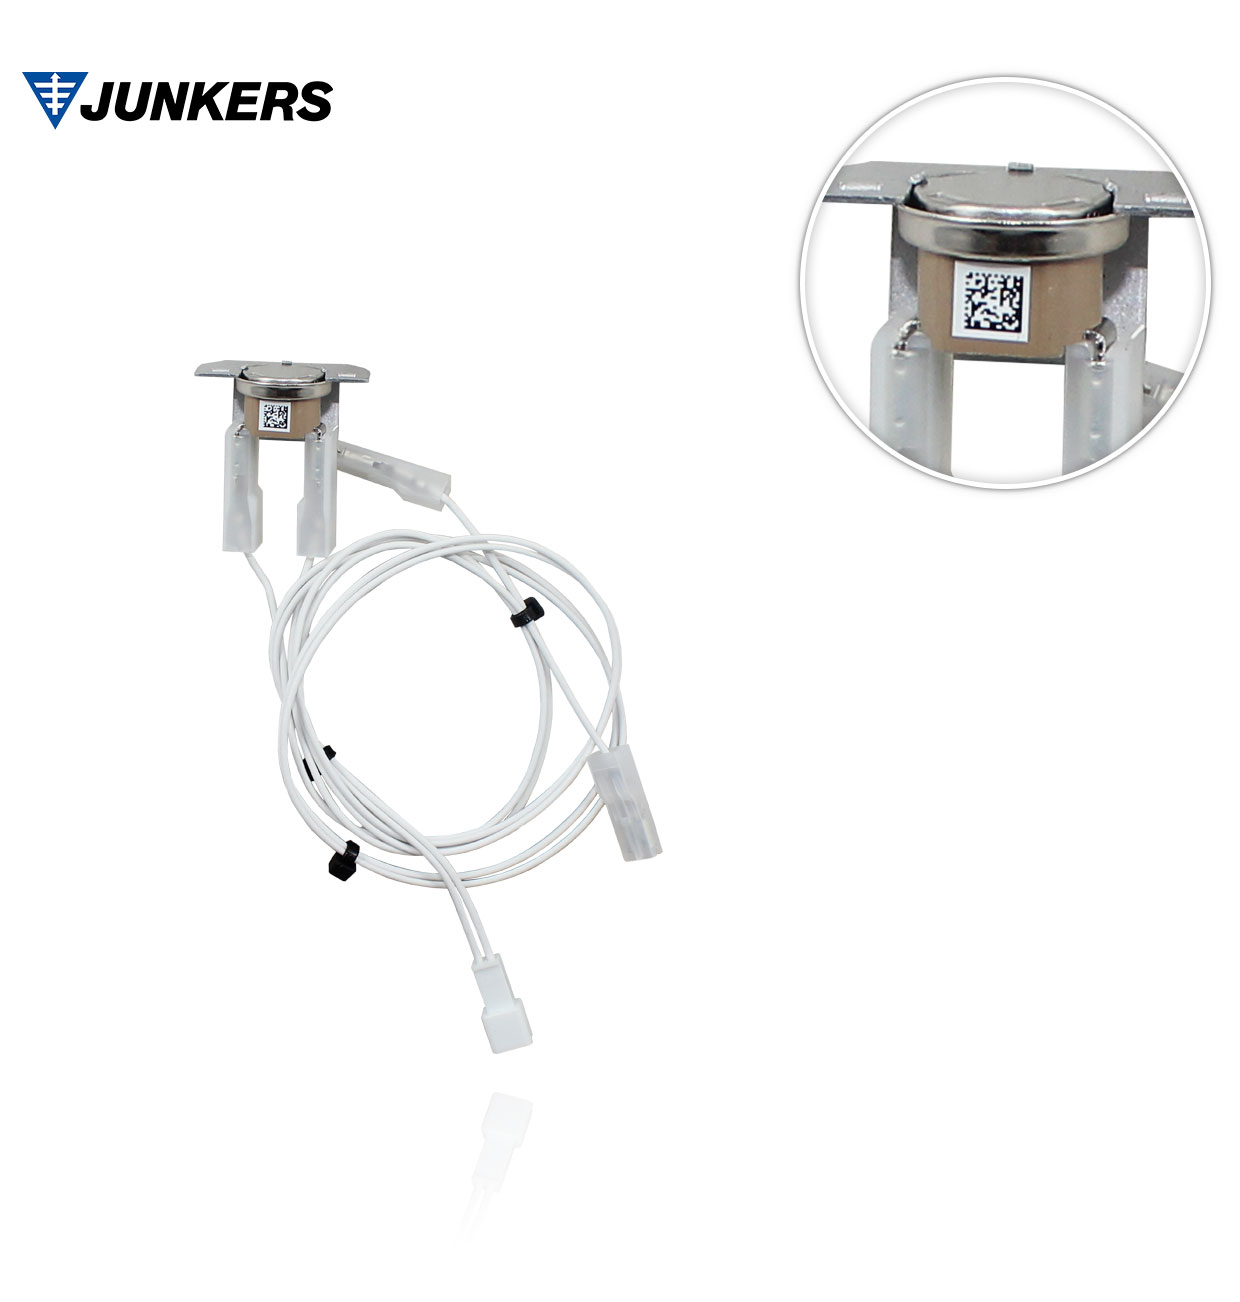 JUNKERS 8707206414 GAS CONTROL DEVICE